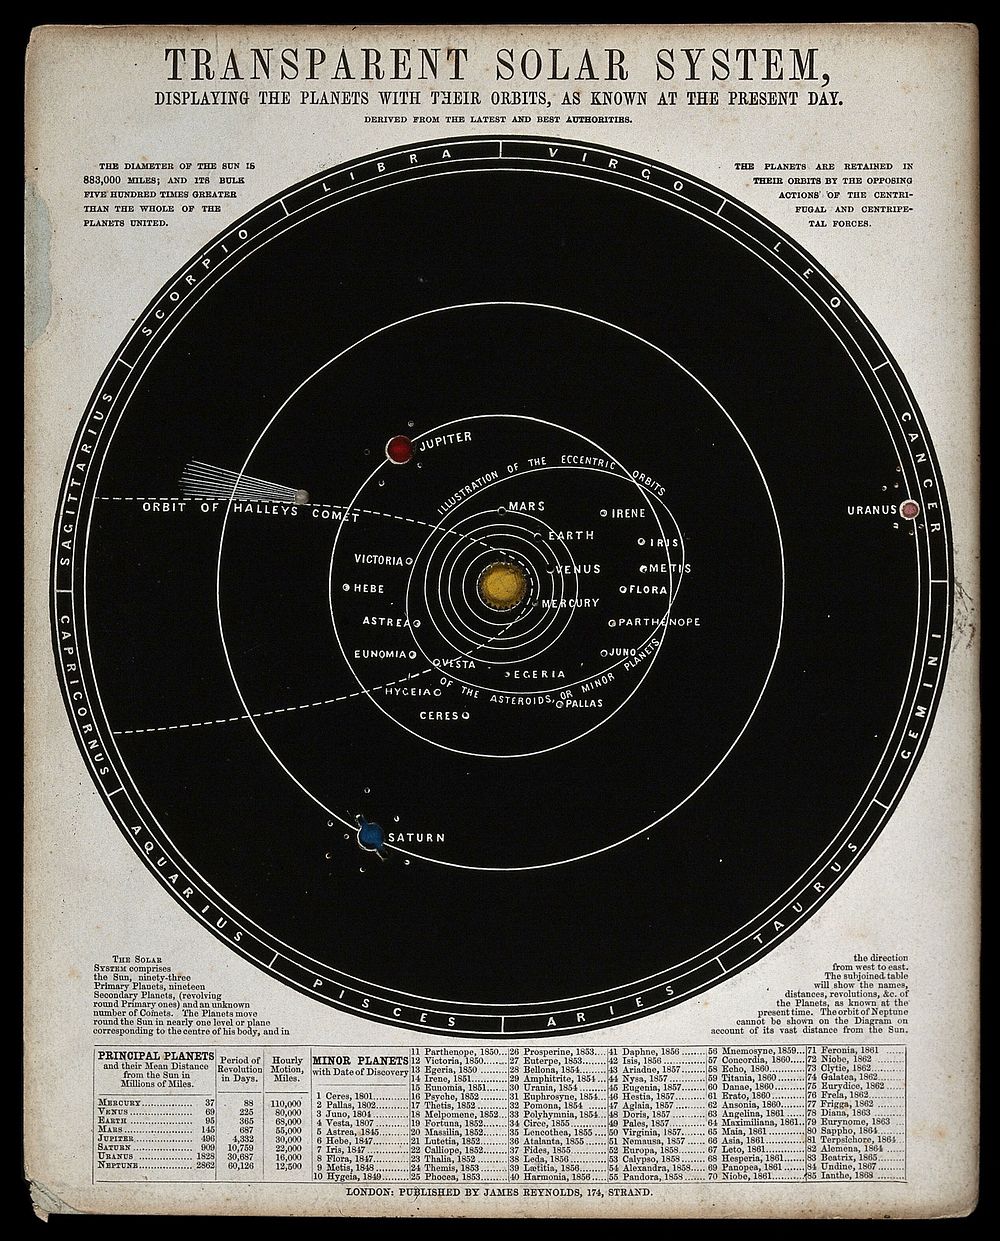 Transparent solar system, displaying the planets with their orbits, as known at the present day.